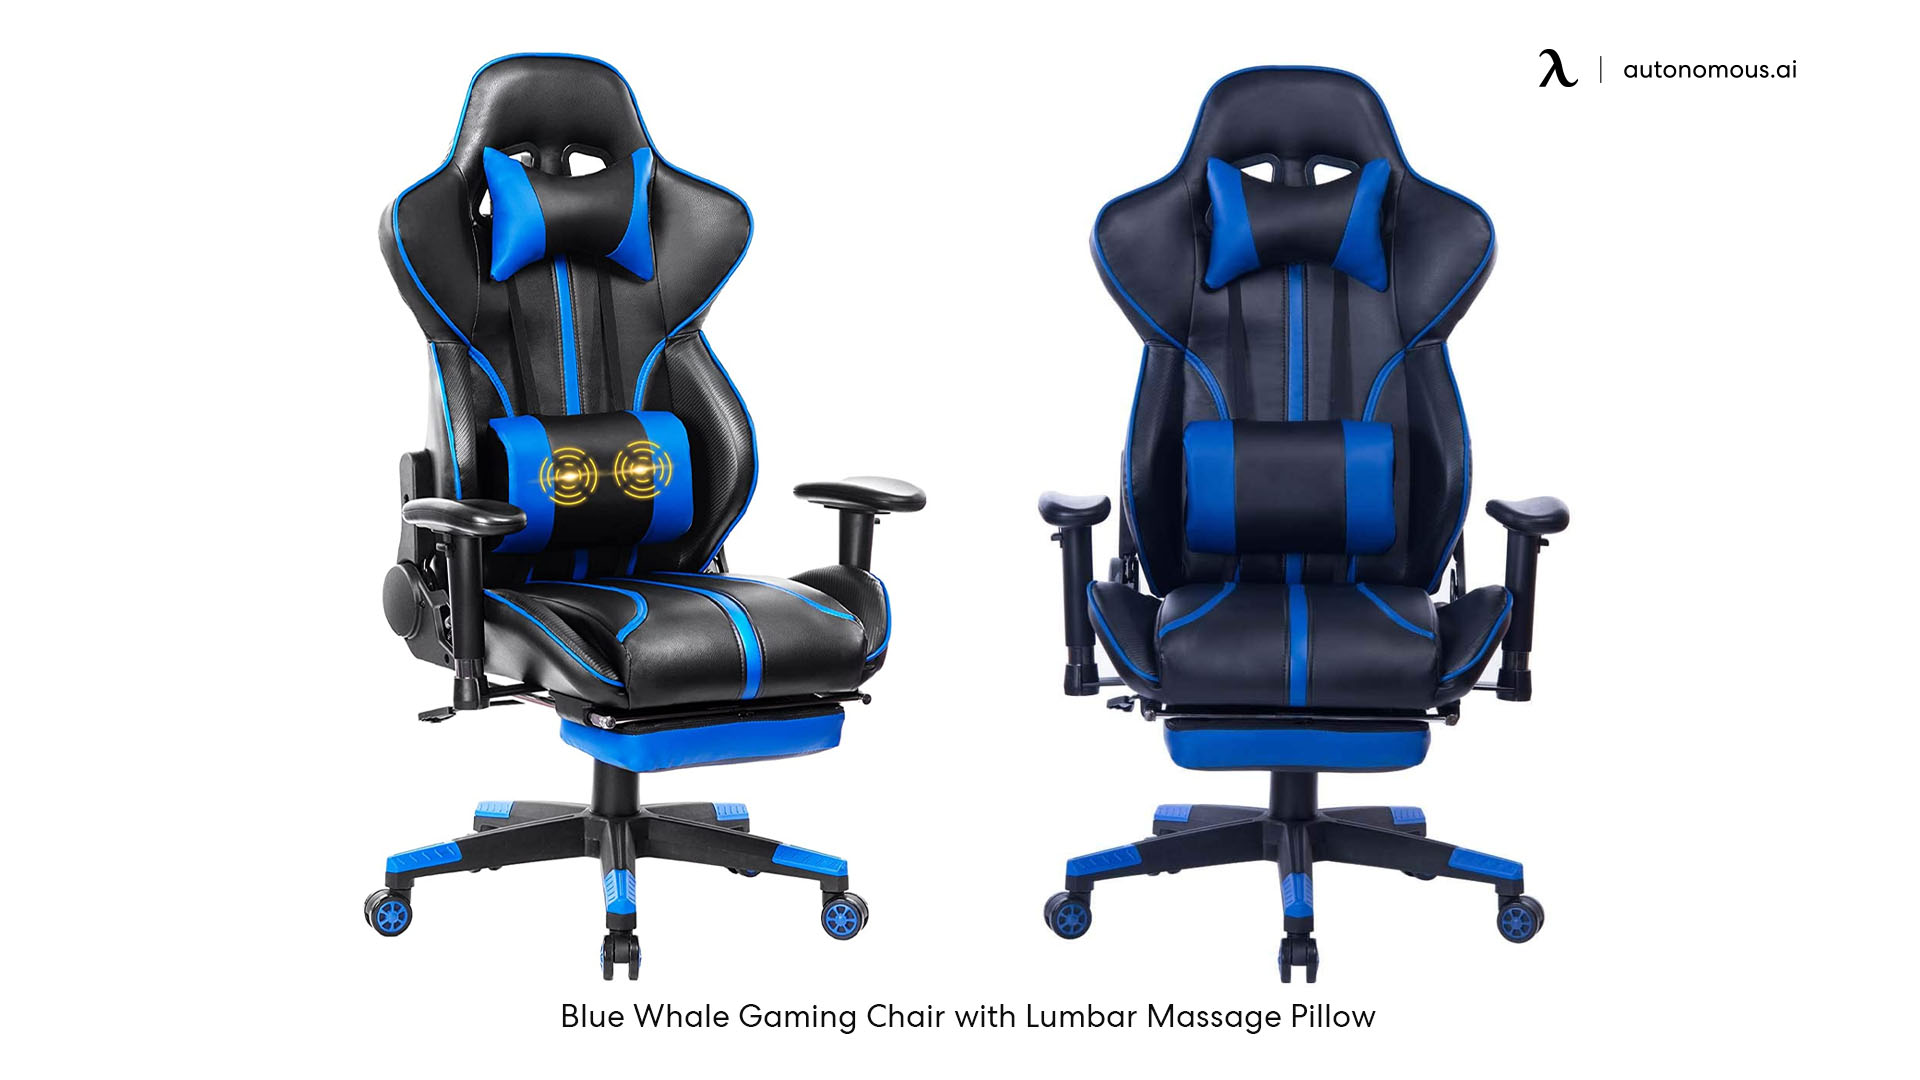 Blue tall Whale Gaming Chair with Lumbar Massage Pillow